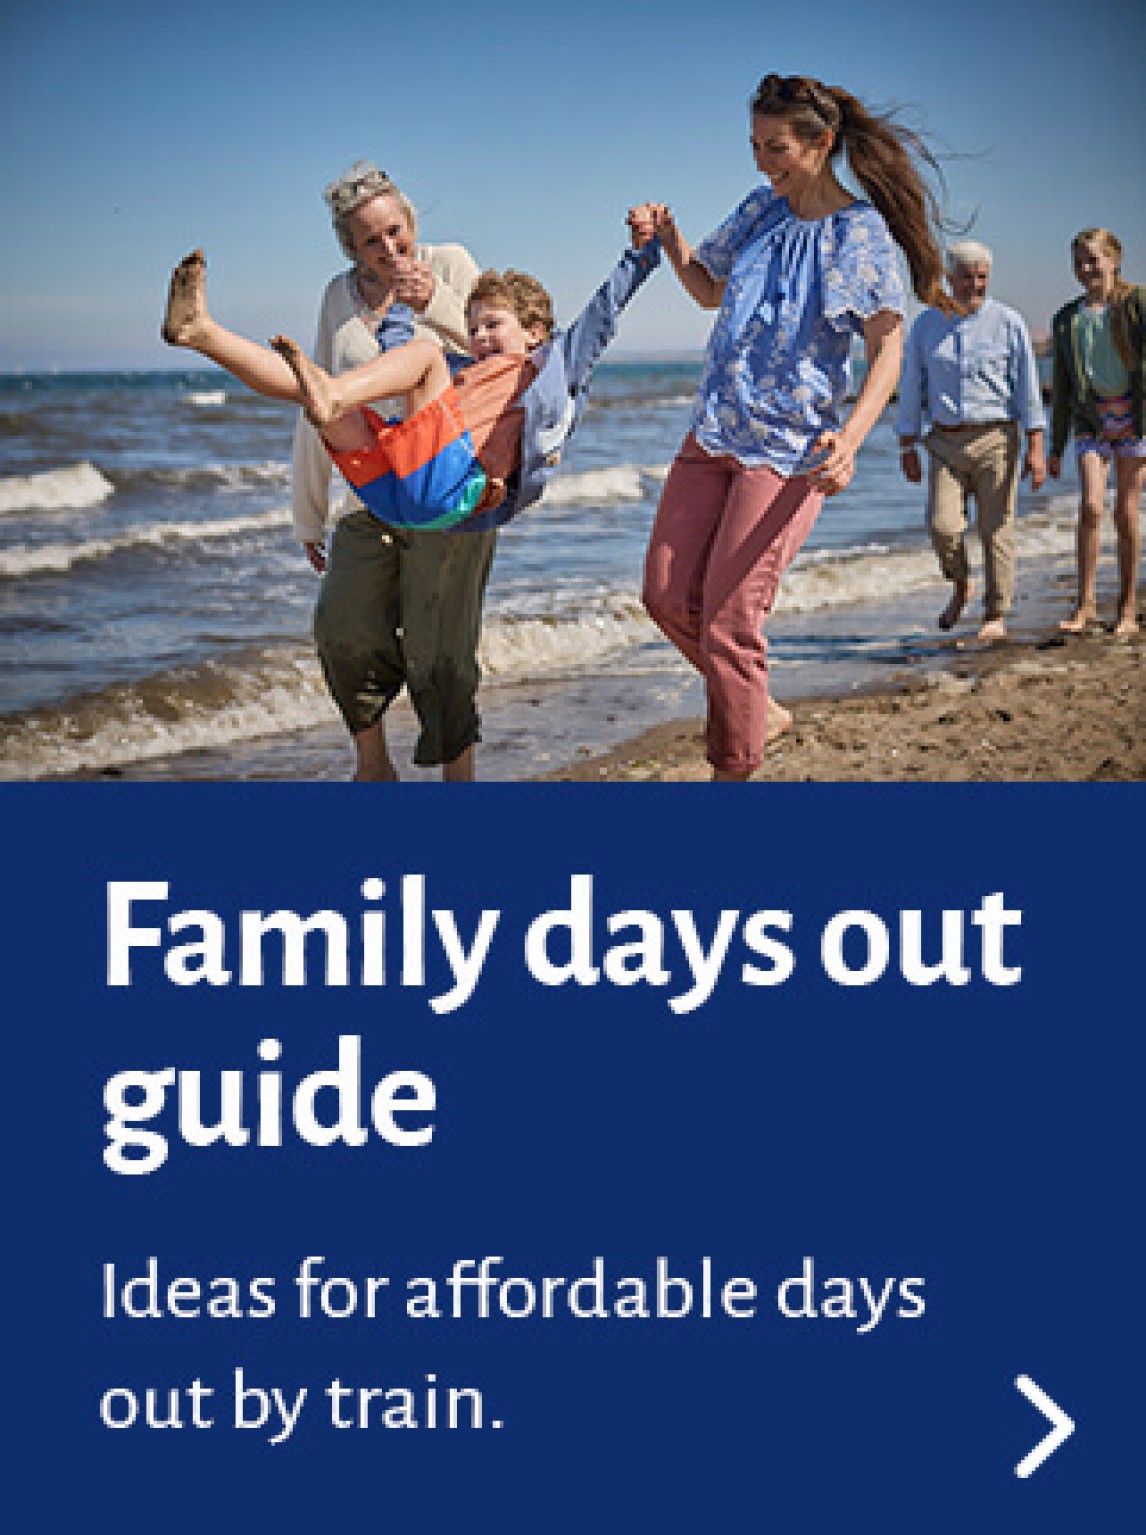 Family days out guide. Ideas for affordable days out by train